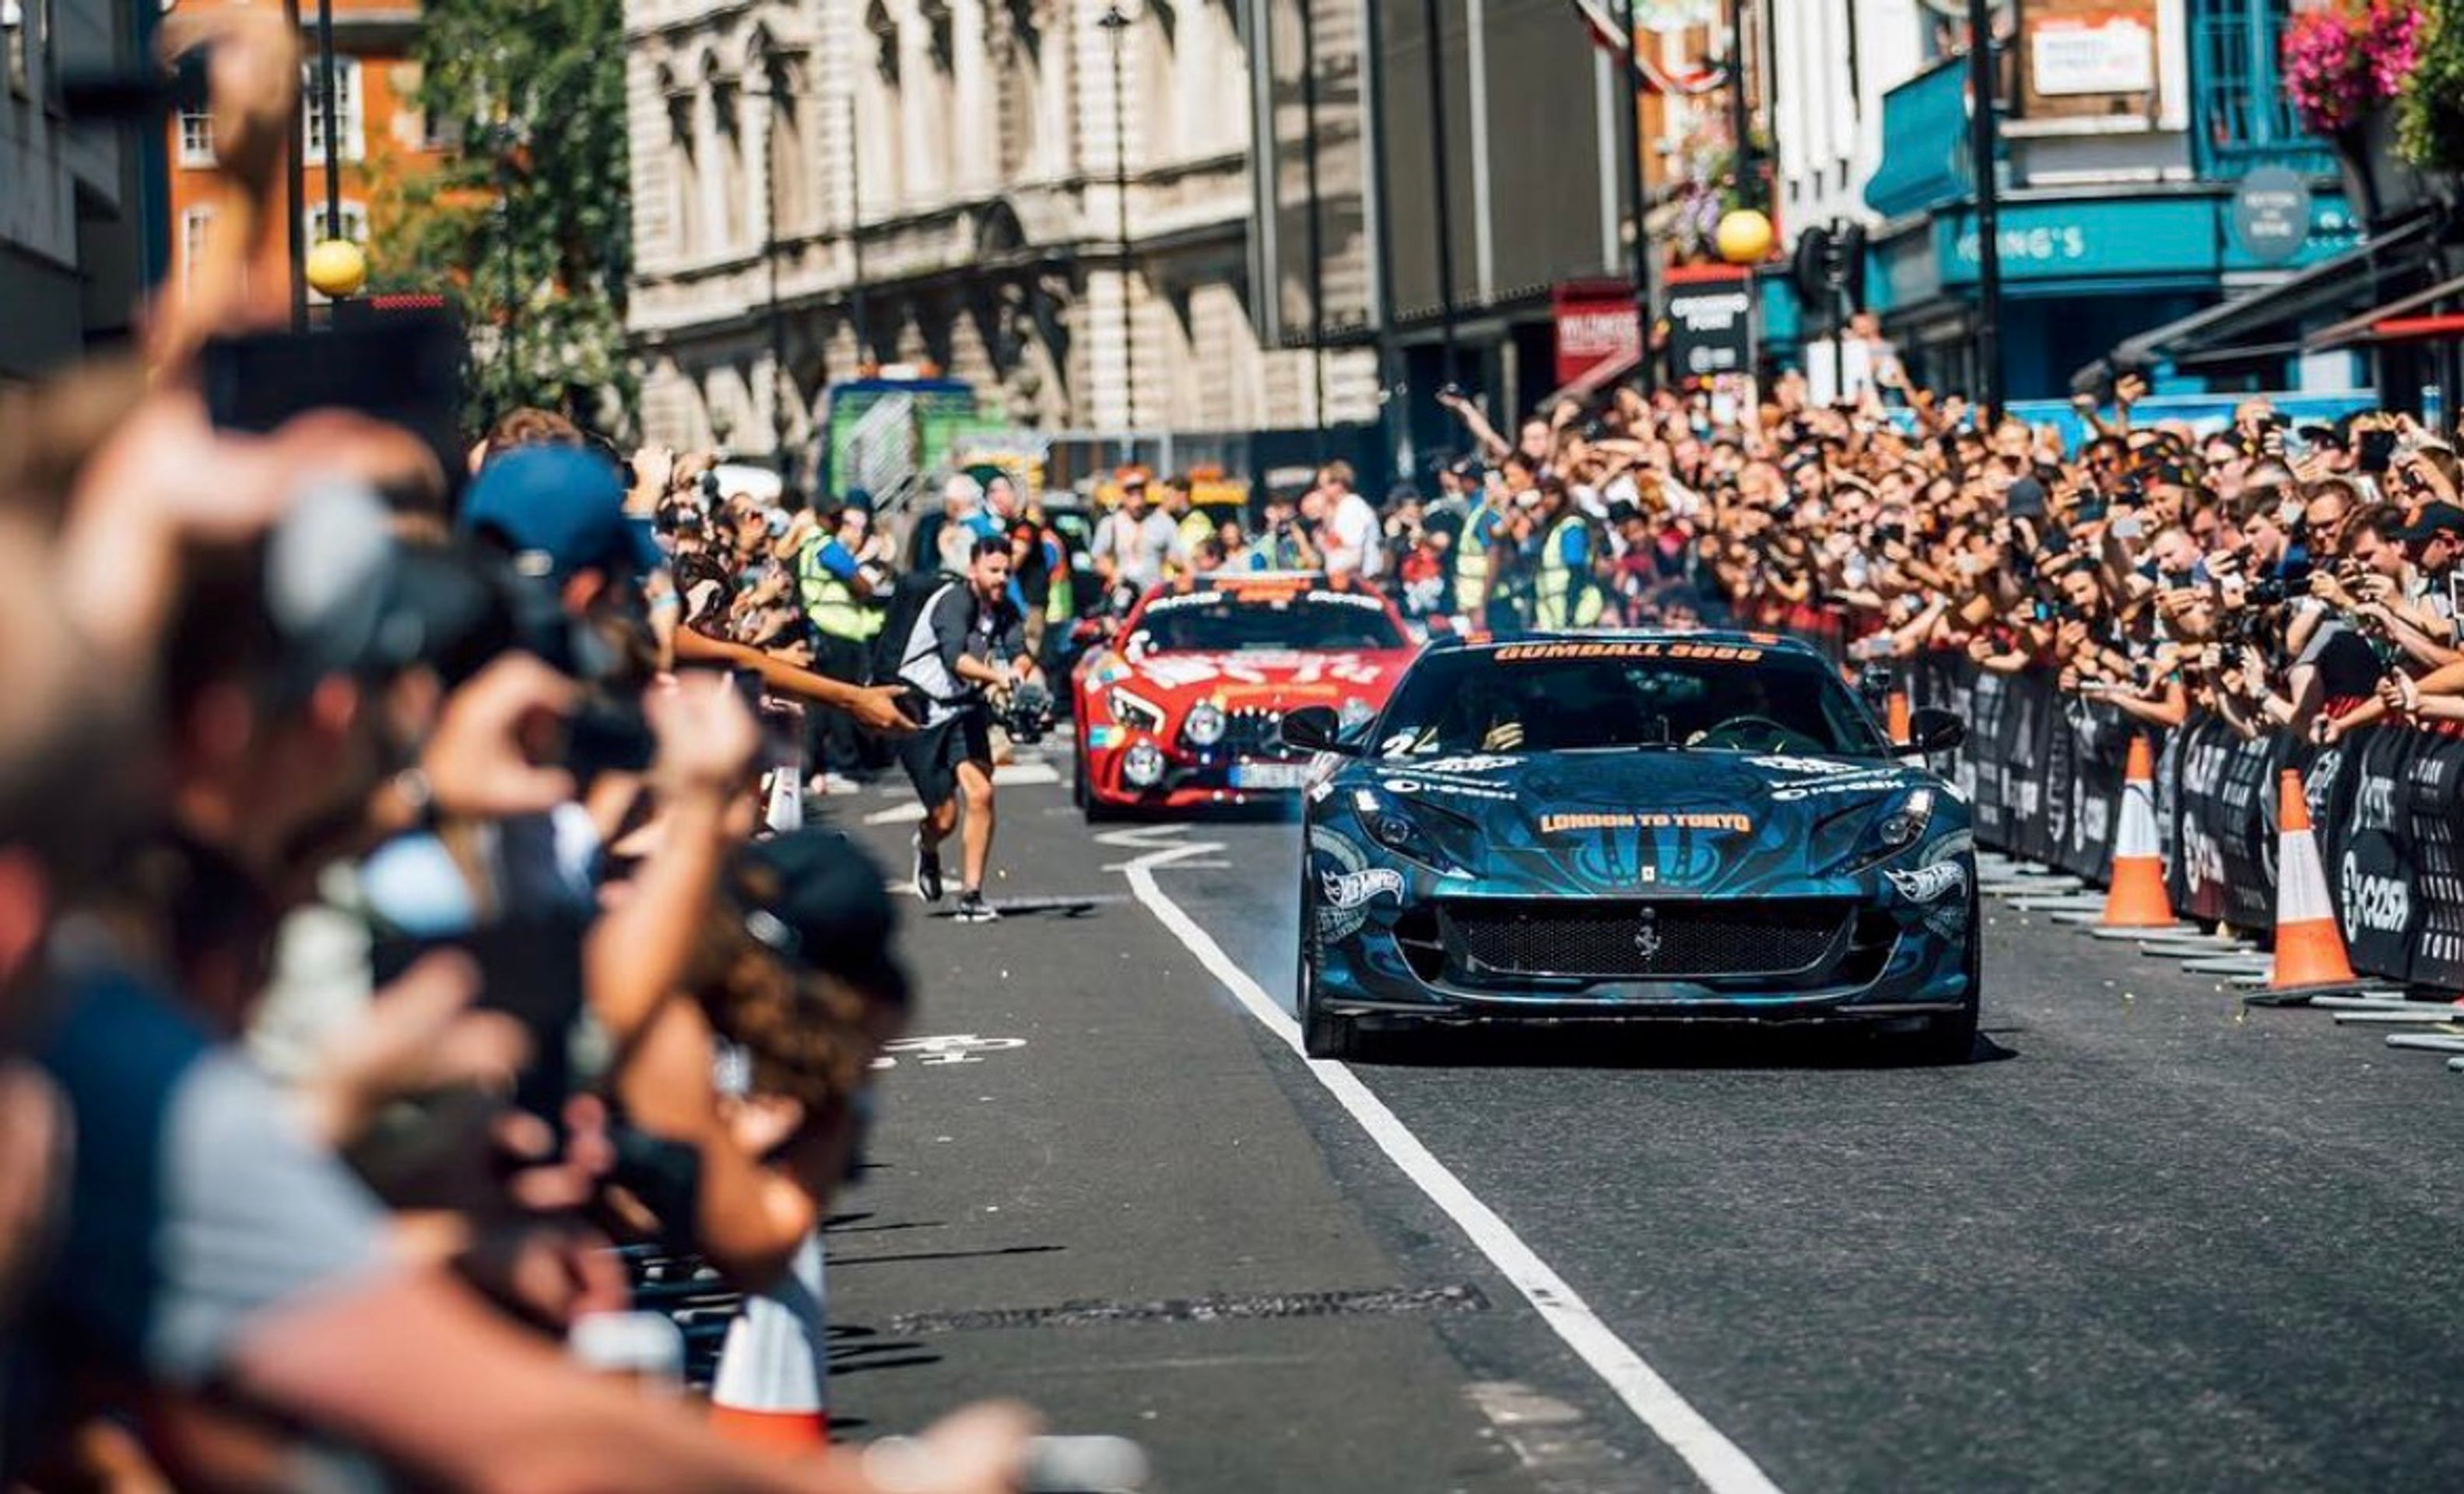 Gumball 3000: London to Tokyo 2018 - 23 - Fotogalerie: Gumball 3000: London to Tokyo 2018 (6/16)